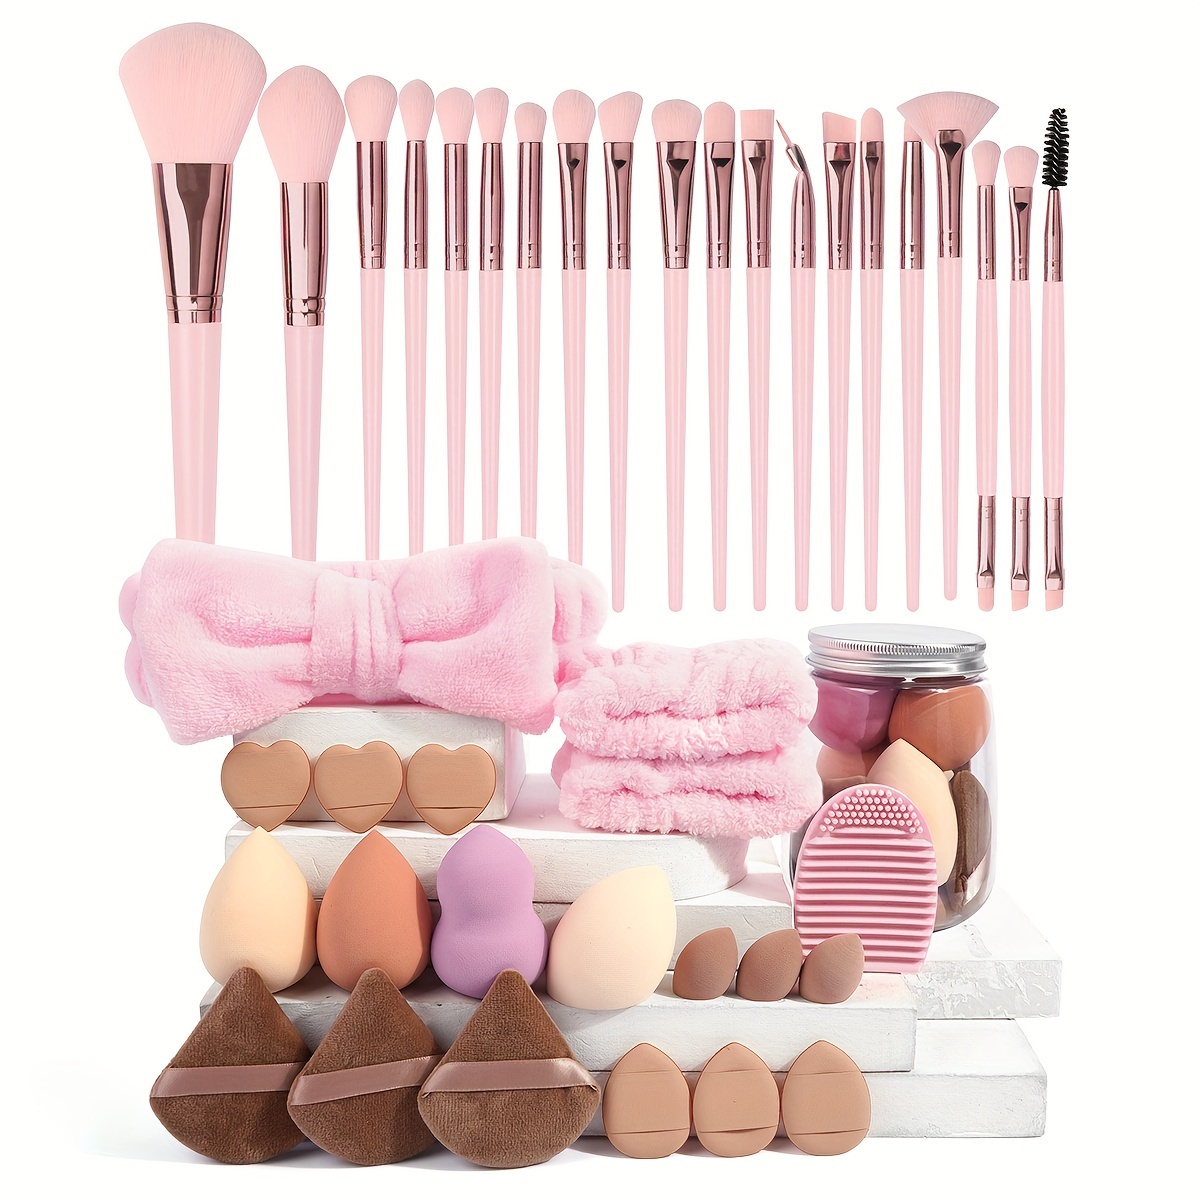 

Maange 41-piece Makeup Tools With 20 Brushes, 16 Sponges, Sponge Holder, Cleaning Pad, Headband, Wristband | Skin-friendly Cosmetic Tools | Portable Travel Kit | Beginner Gift Set